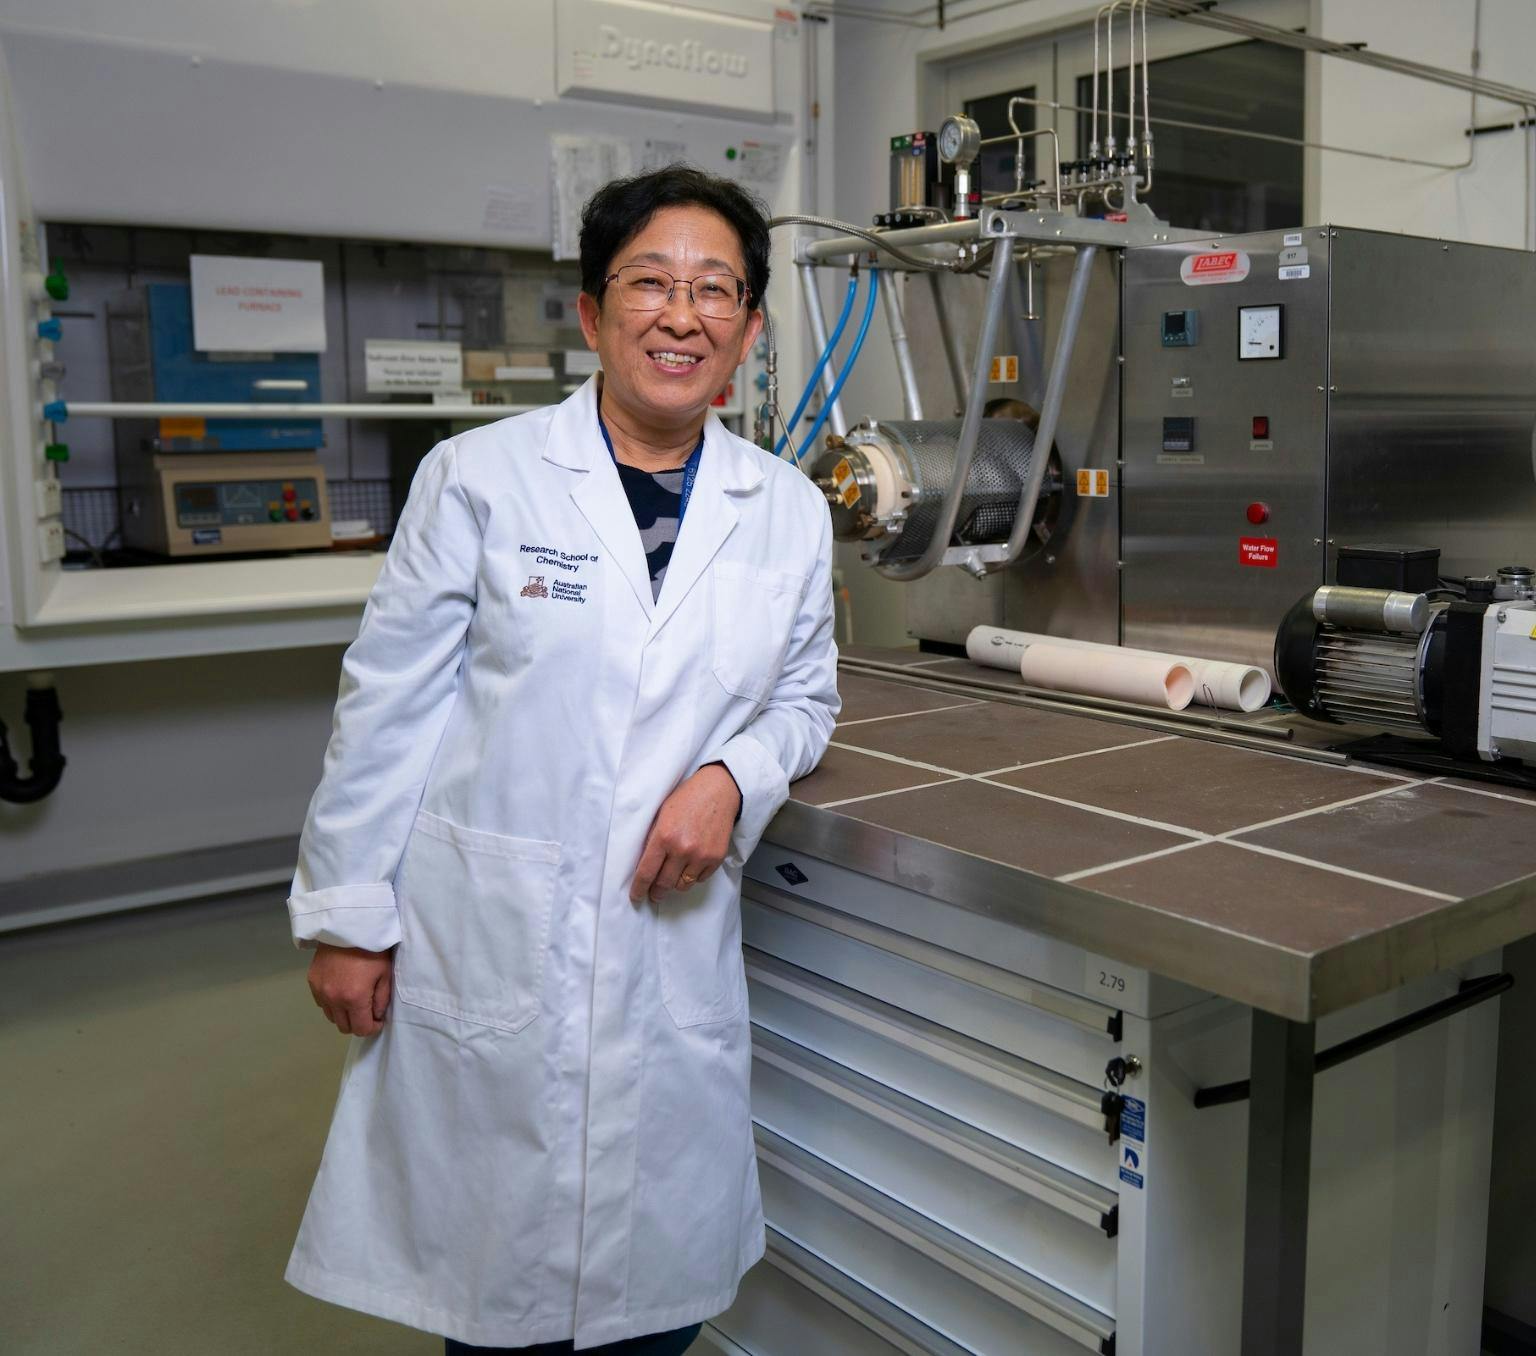 Yun Liu is wearing a white lab coat and smiling at the camera. She is standing in a laboratory